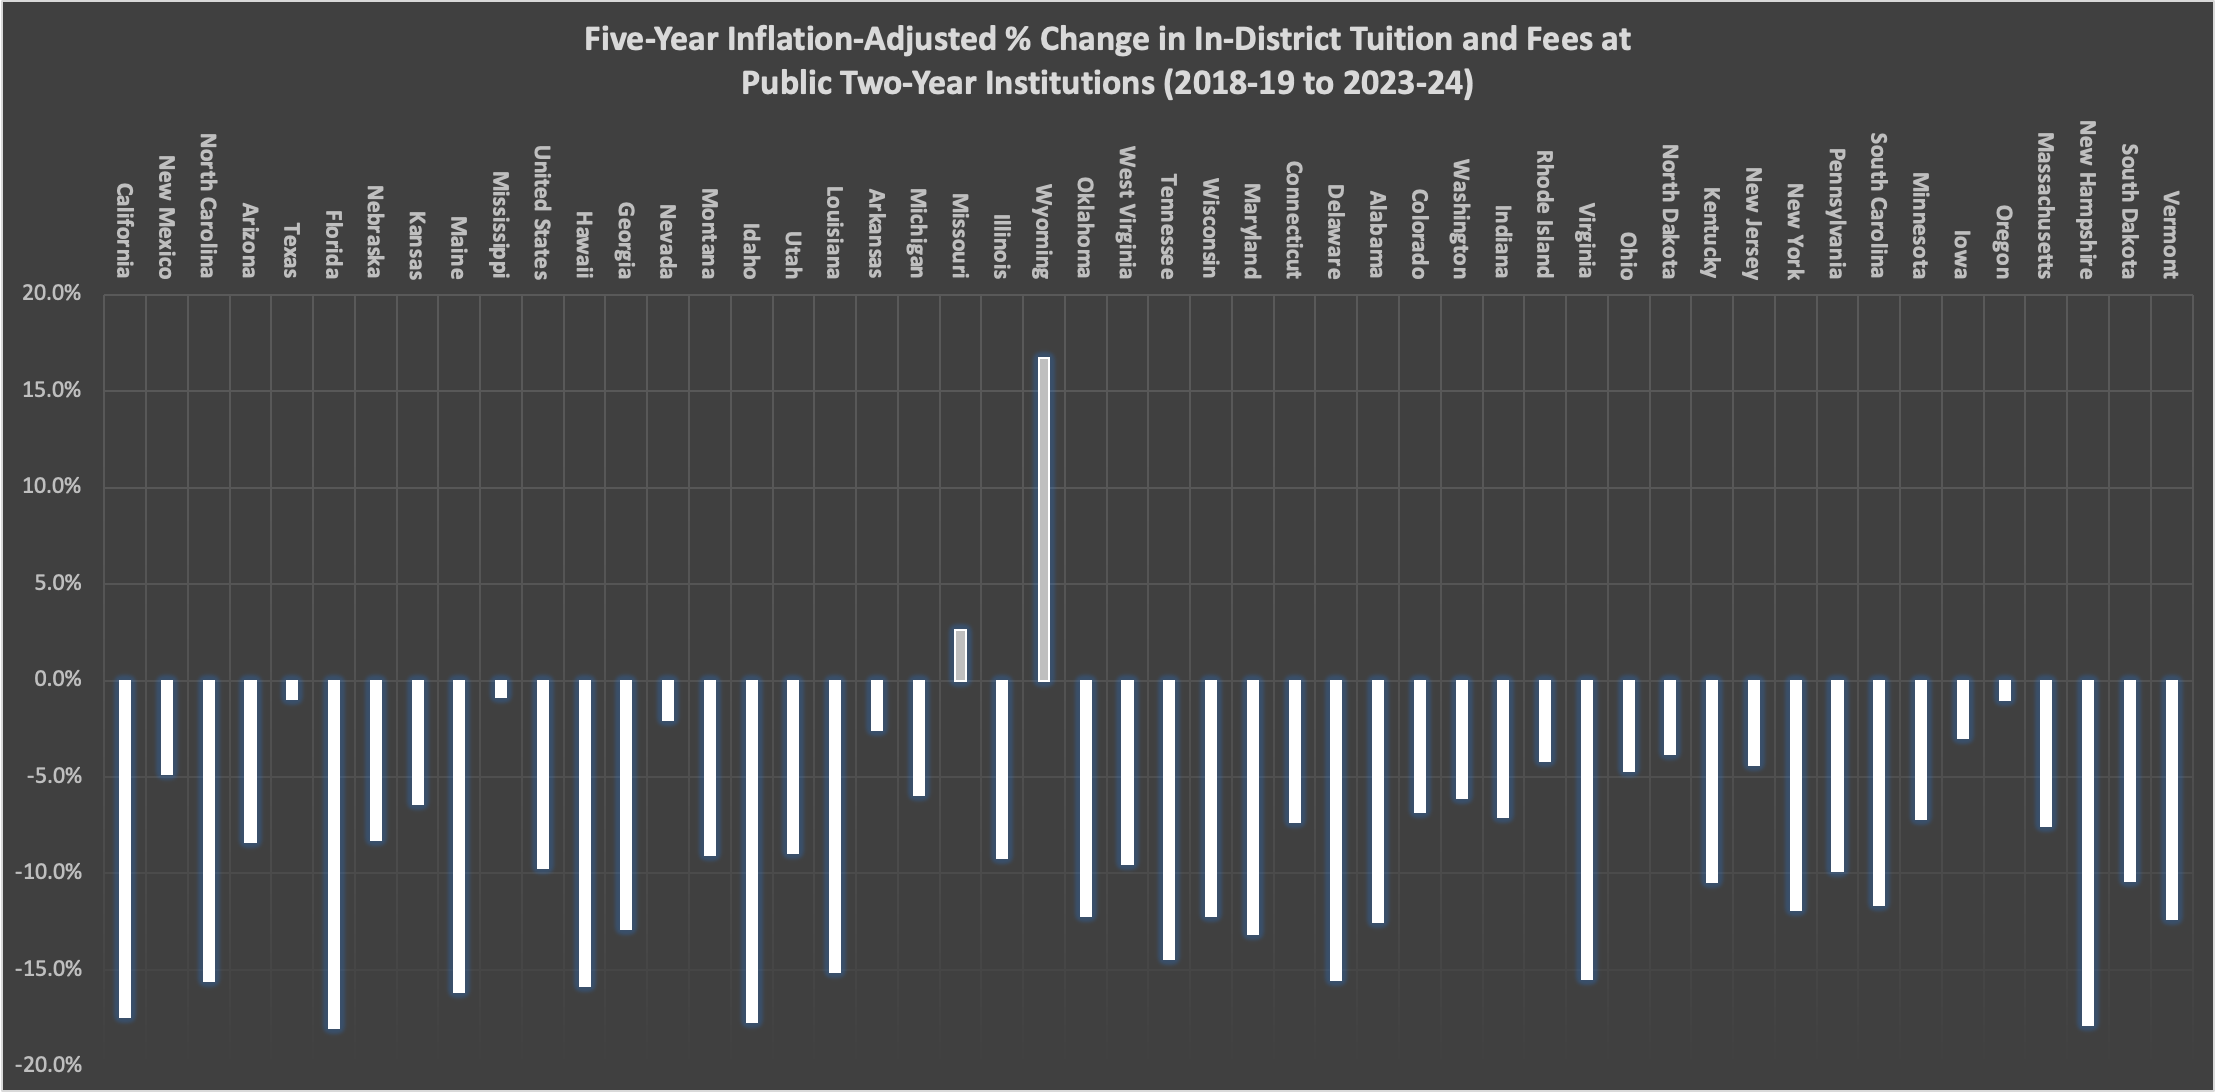 Five-Year Inflation-Adjusted % Change in In-District Tuition and Fees at Public Two-Year Institutions (2018-19 to 2023-24) 